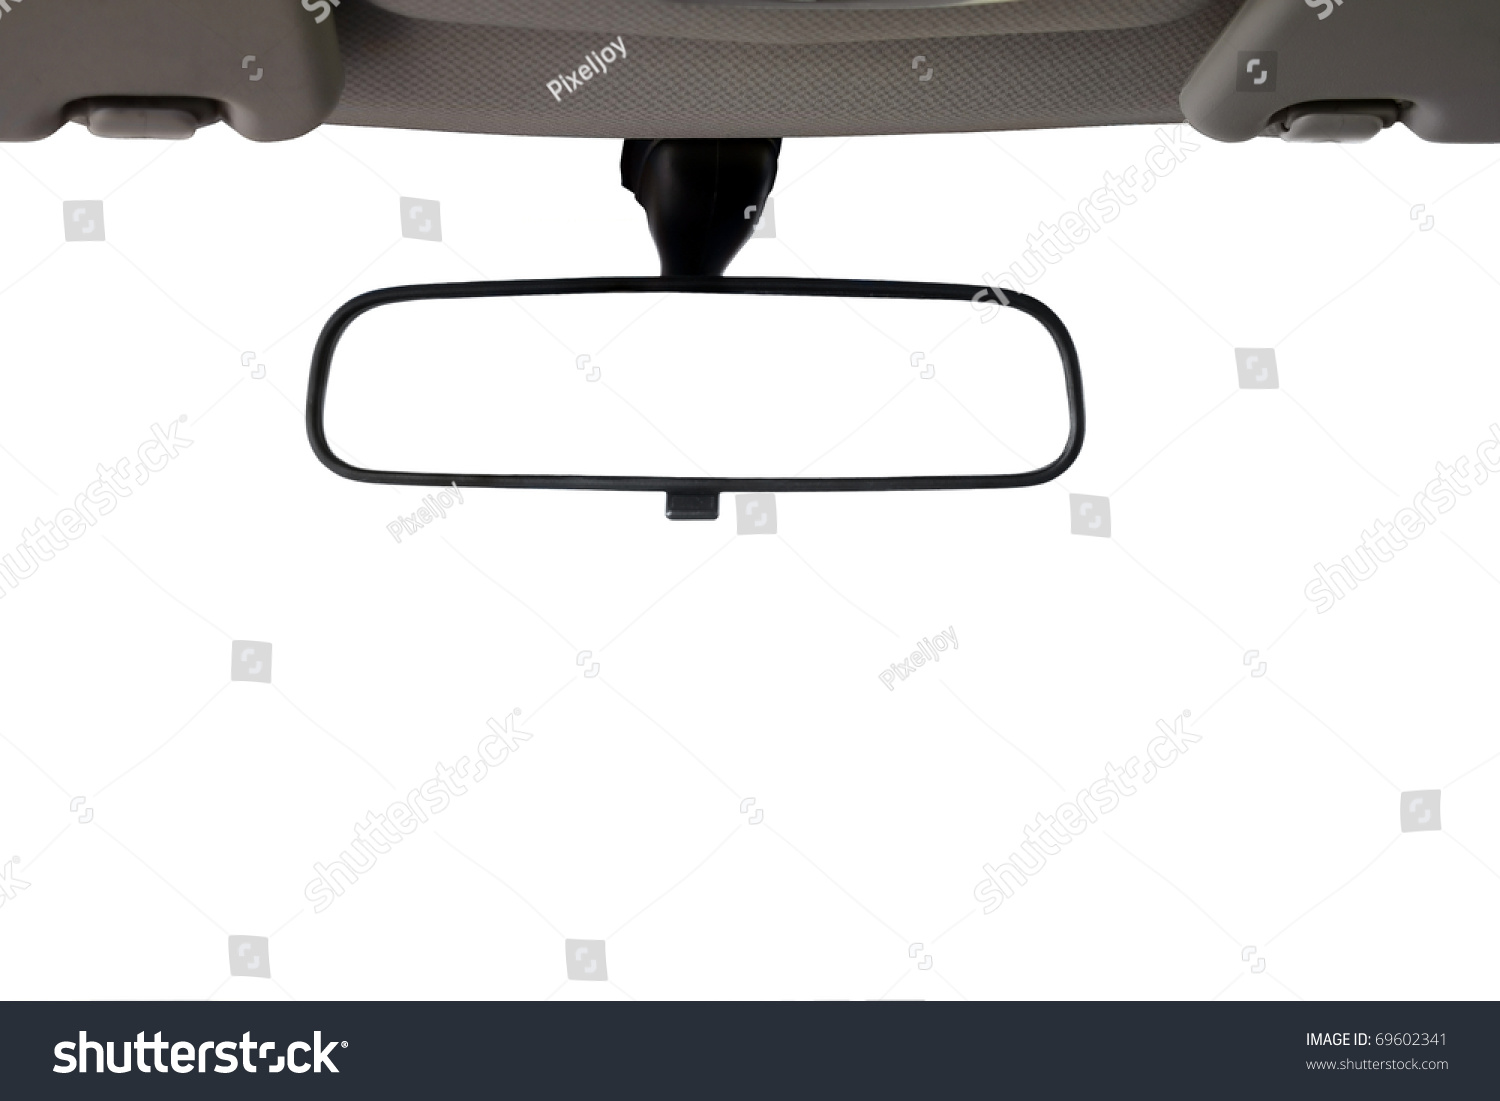 Car Rear view mirror isolated with clipping path for creative landscape montage #69602341